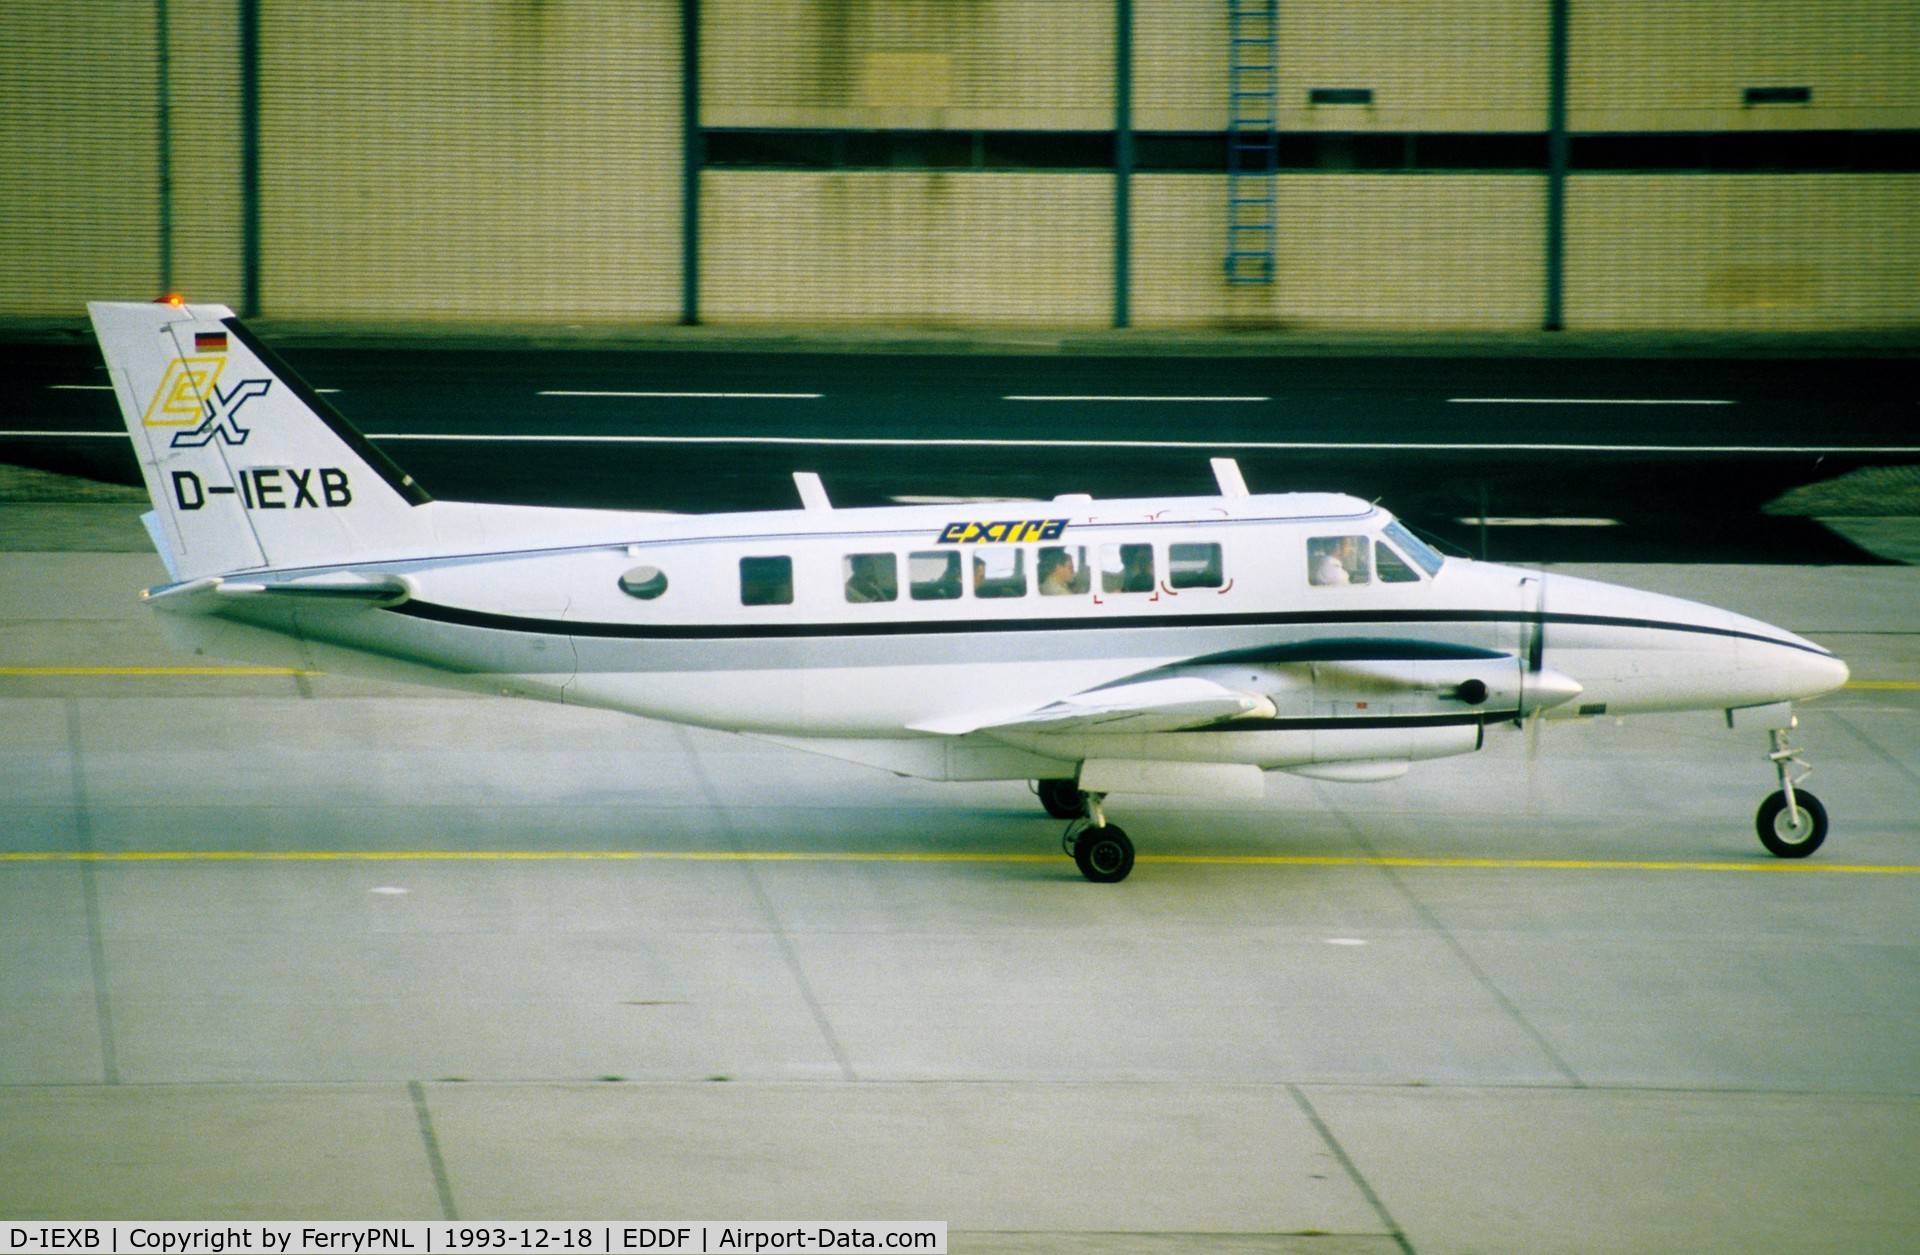 D-IEXB, 1969 Beech 99 Airliner C/N U-70, Extra Be99 taxiing past